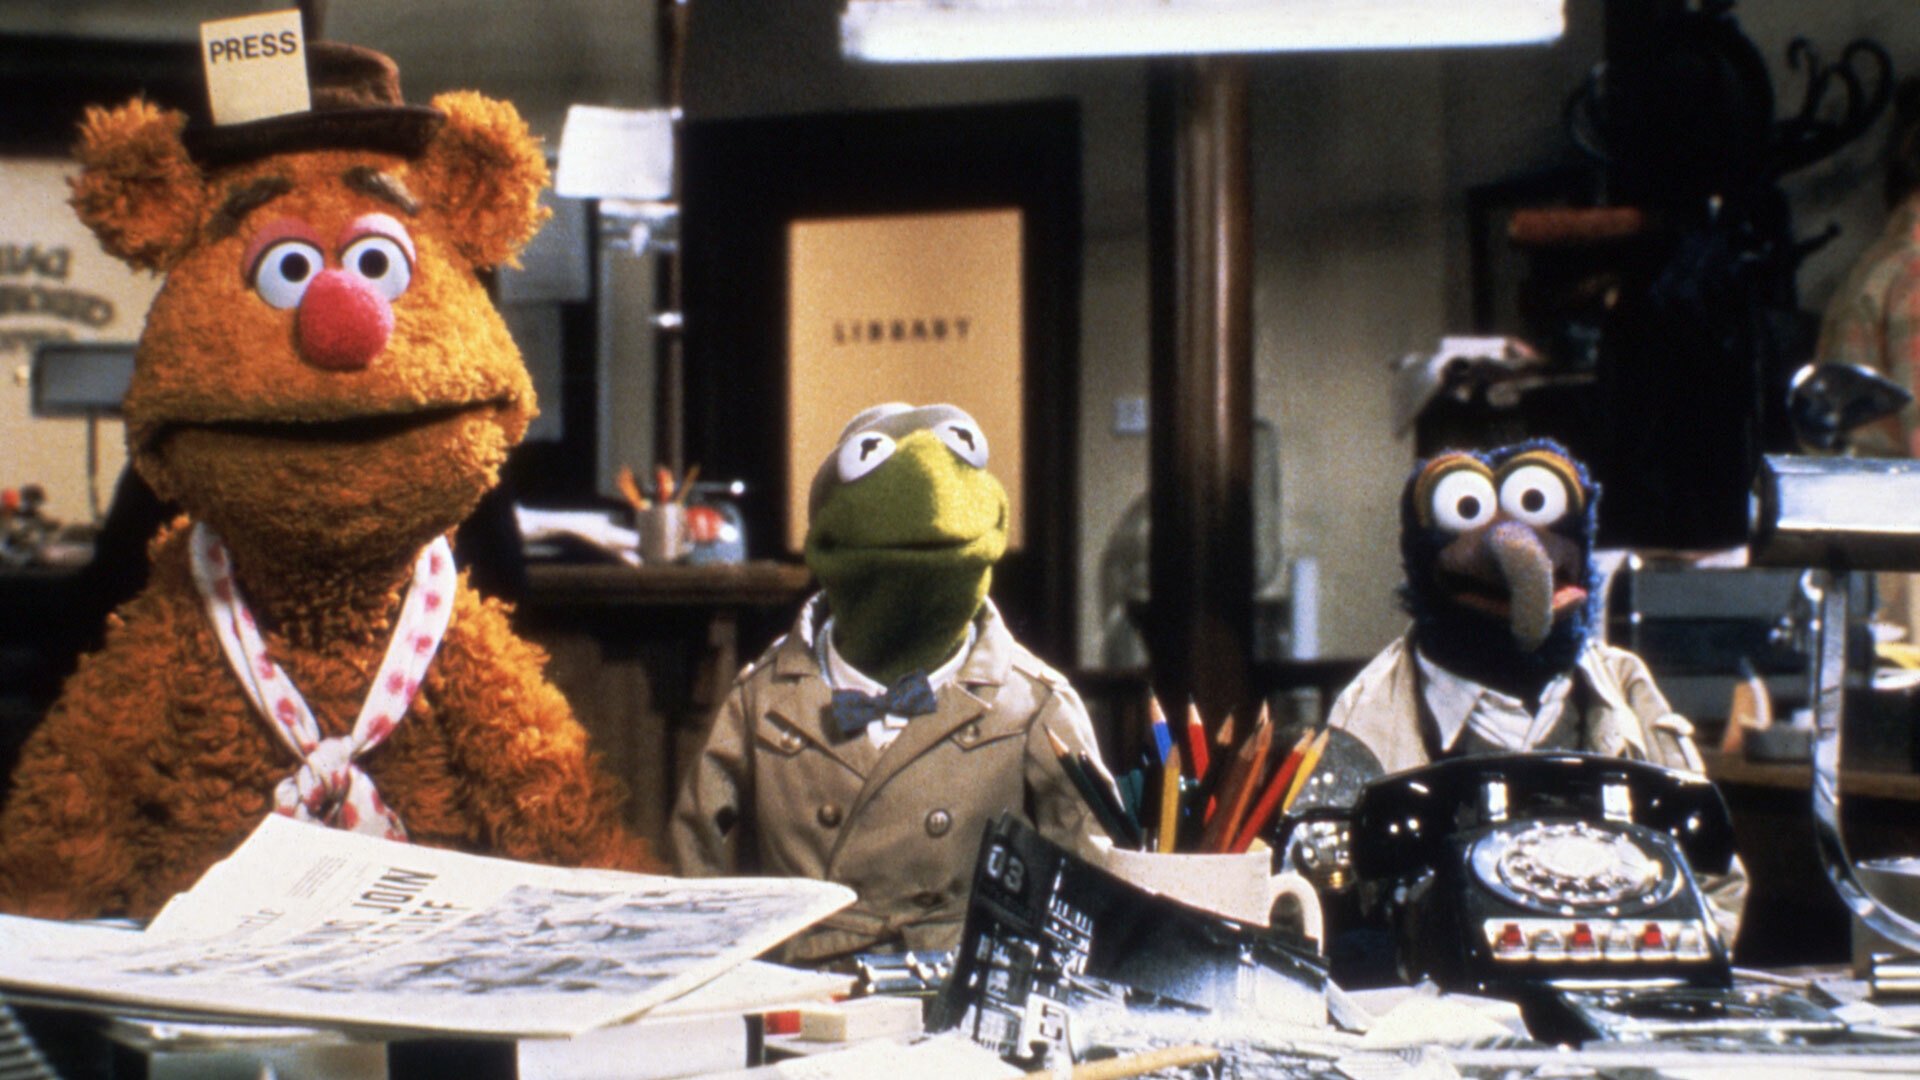 A still from "The Great Muppet Caper." Fozzie Bear, Kermit, and Gonzo stand side by side in front of a desk, in what appears to be a cluttered newsroom.